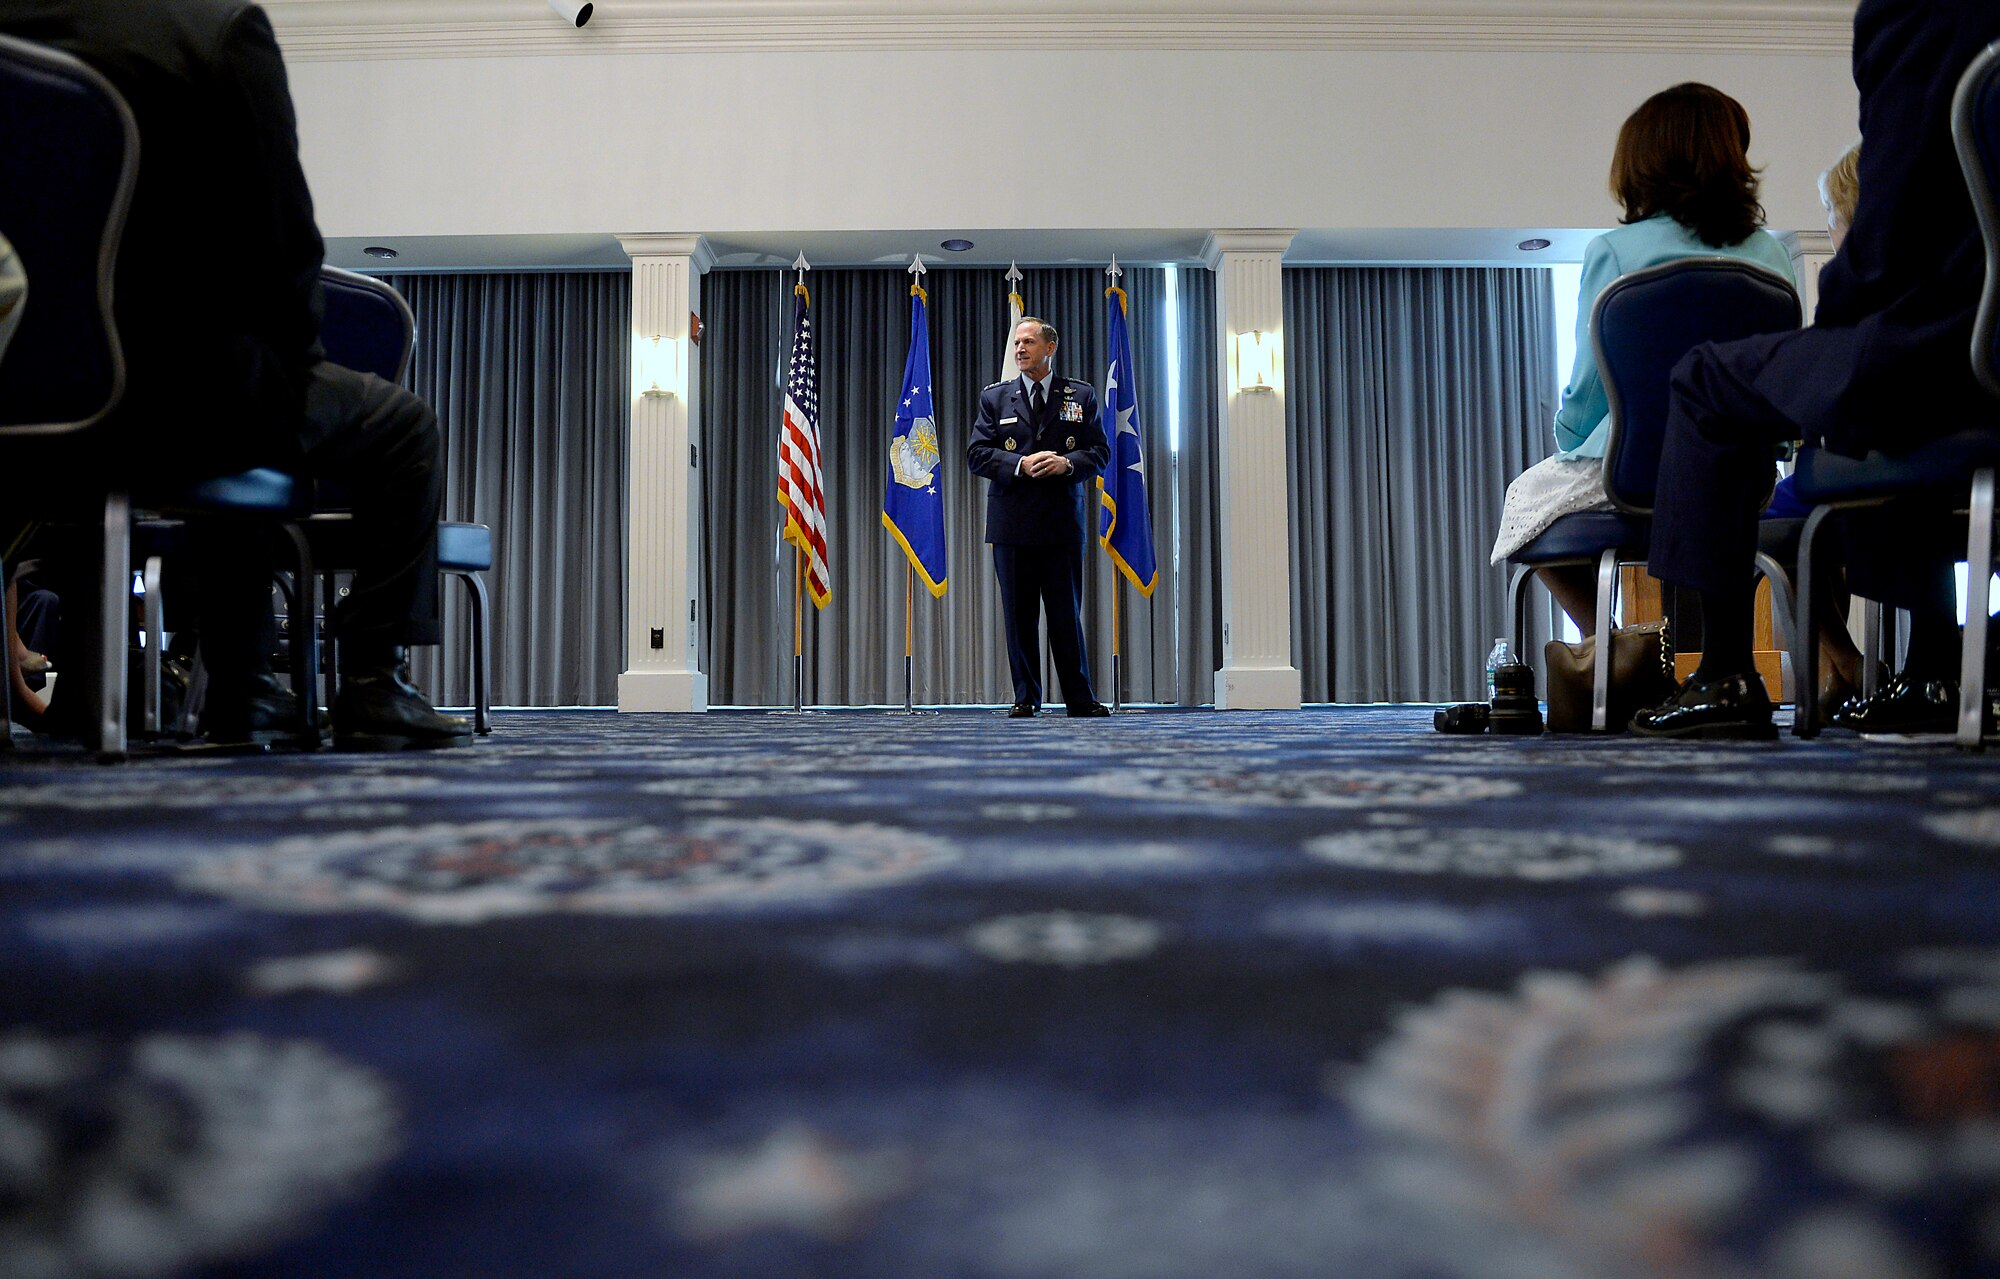 Gen. David L. Goldfein makes his remarks during his promotion ceremony Aug. 6, 2015, in Washington, D.C. Goldfein will become the Air Force's 38th vice chief of staff and most recently served as the director of the Joint Staff. (U.S. Air Force photo/Scott M. Ash)